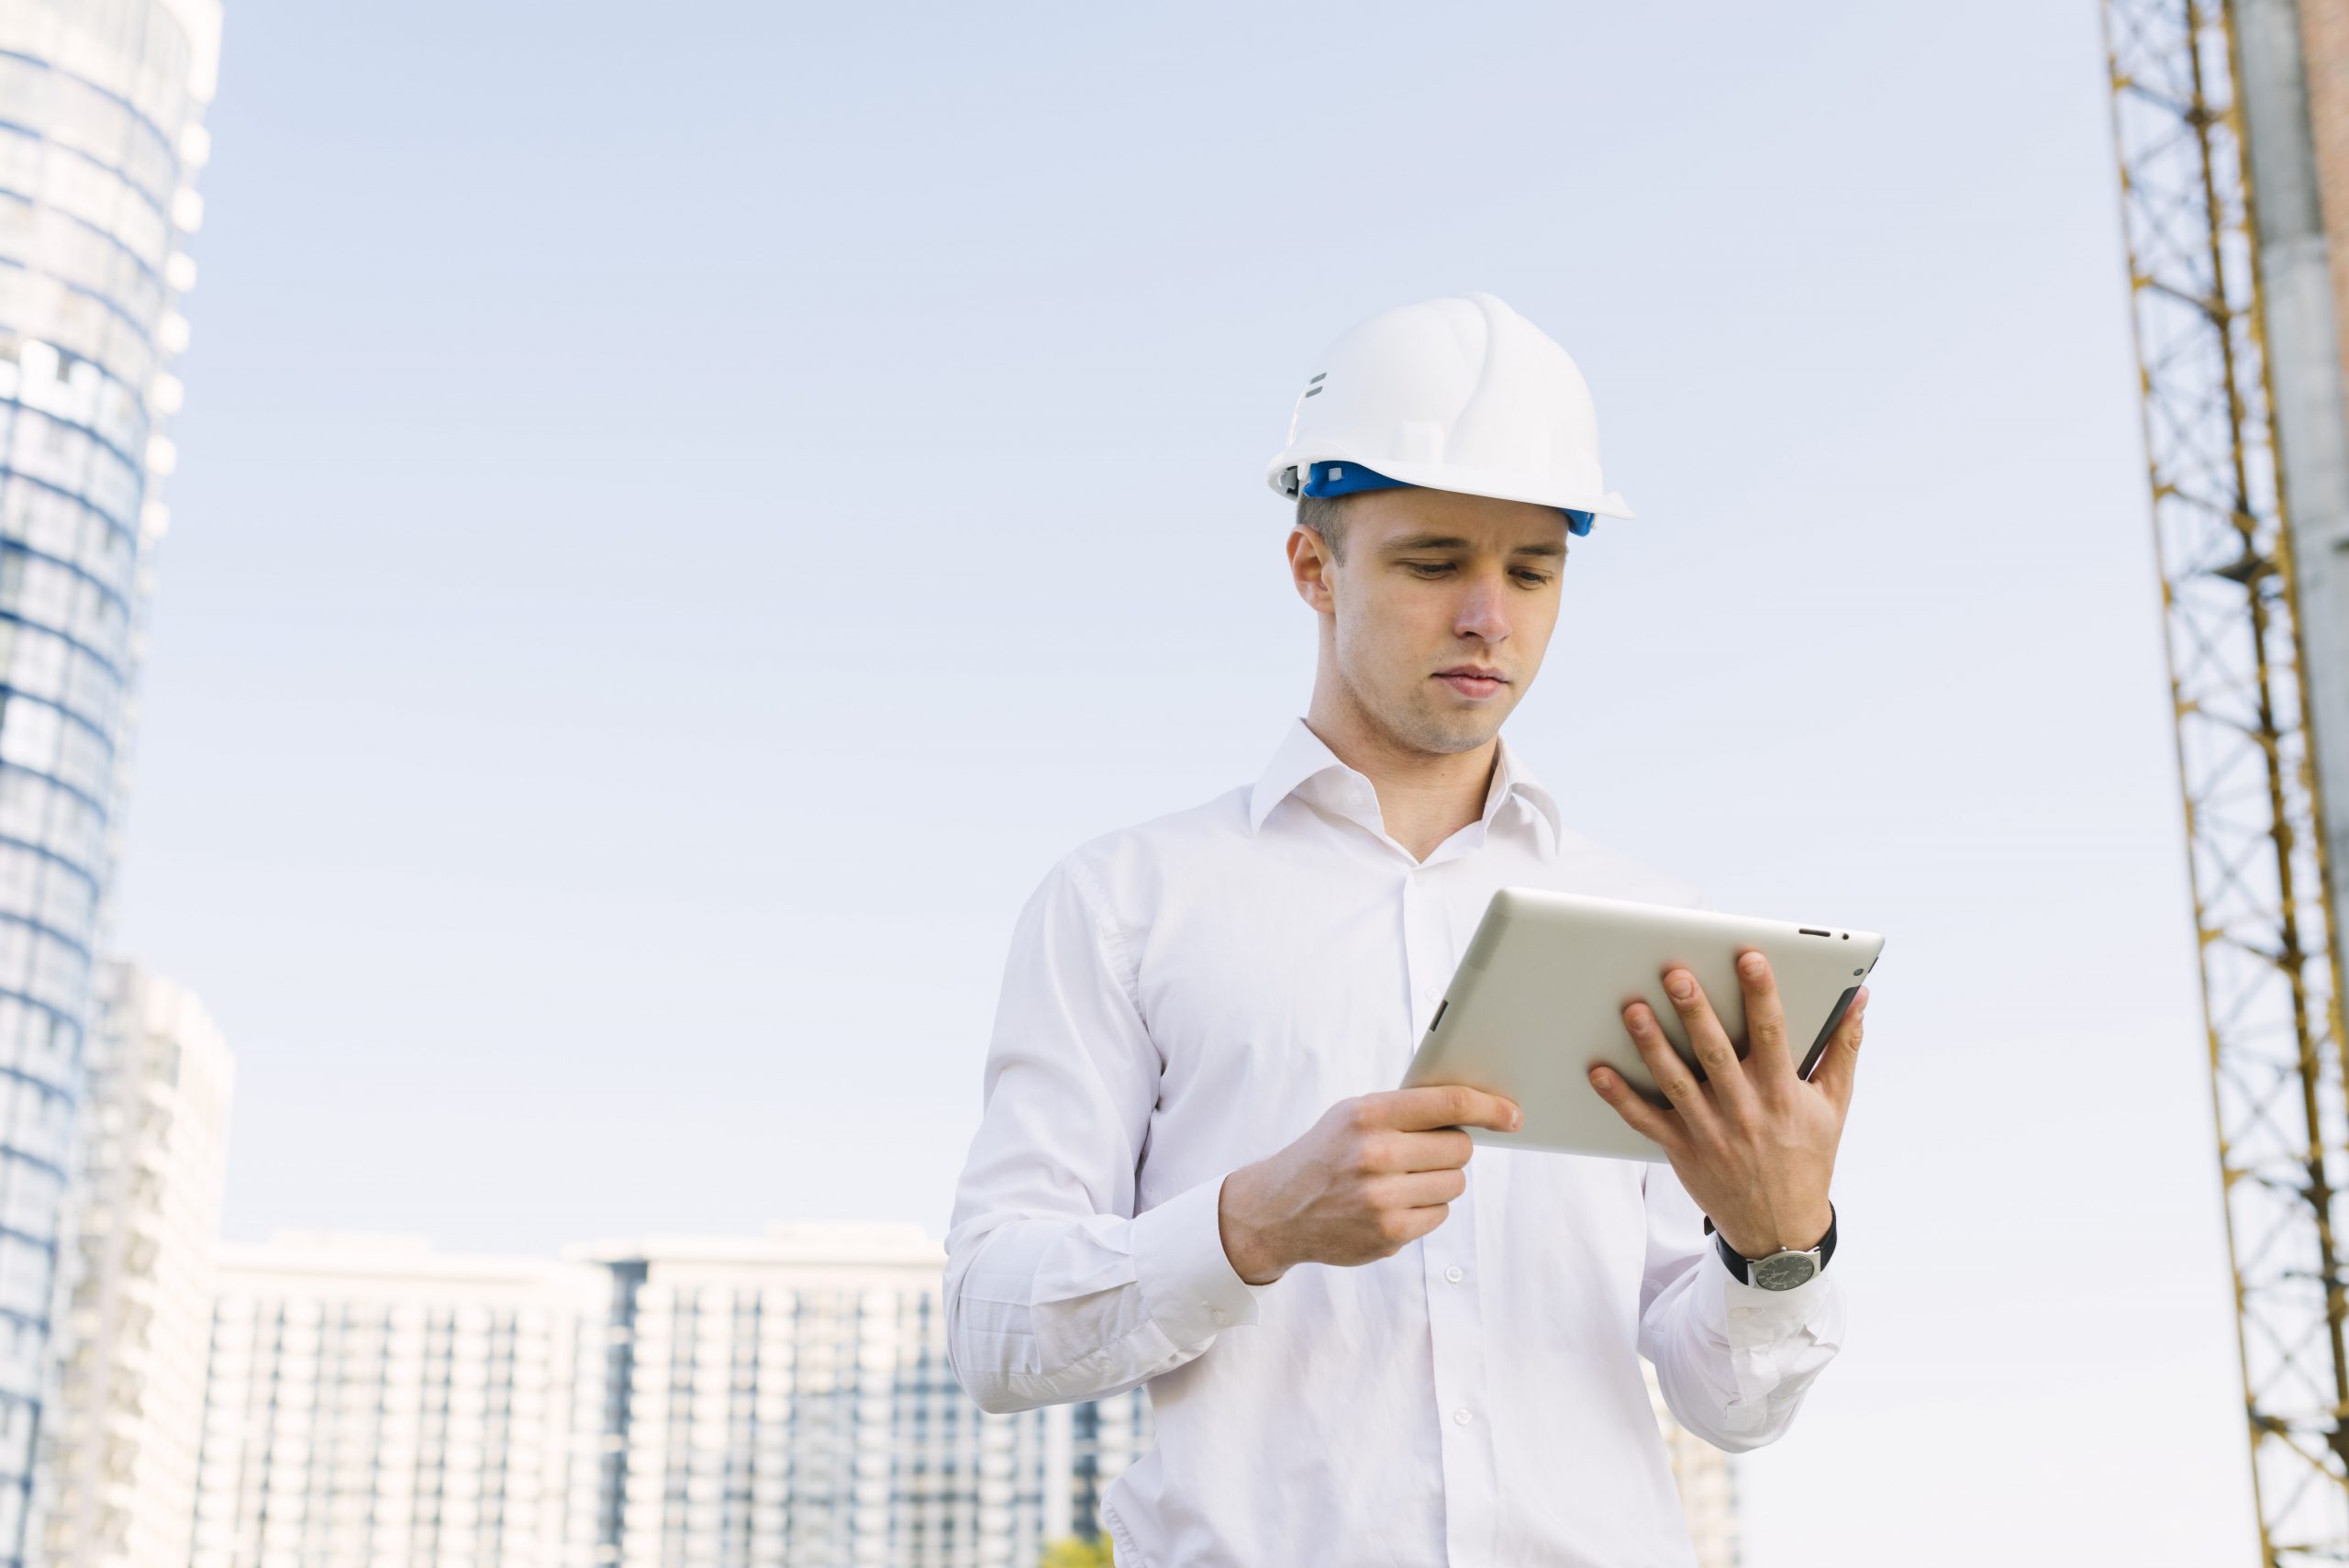 An industrial worker looking his tablet at industrial site.